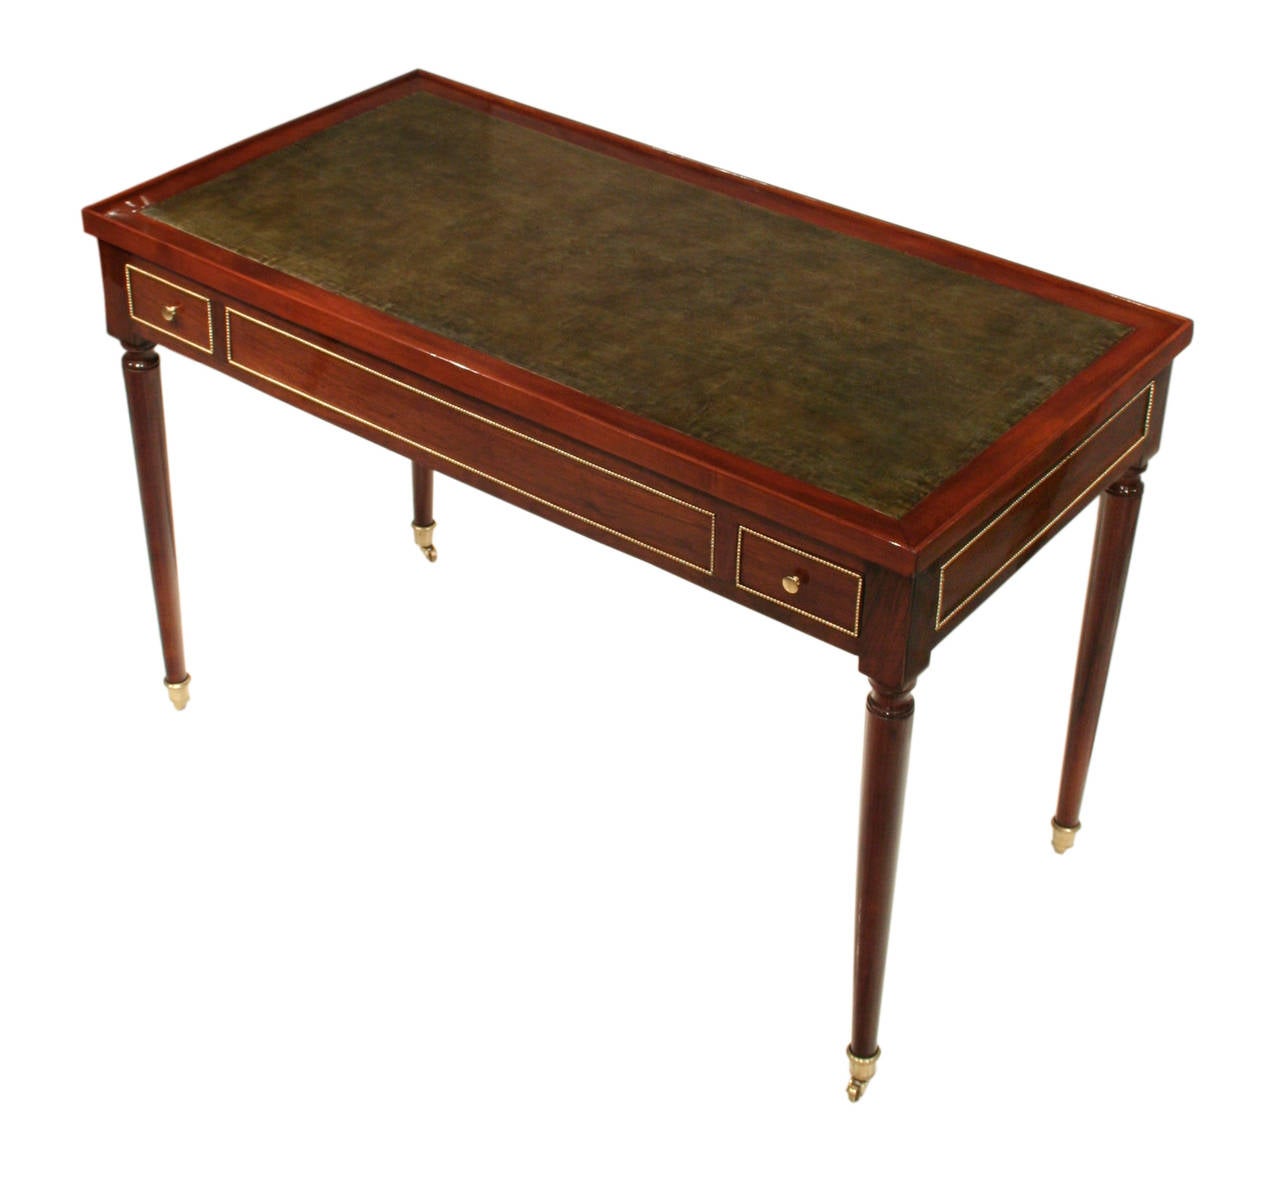 Directoire table with a reversible top. One side of the top has an elegant green leather inset for use as a writing desk, the other side is covered with green felt for card playing. The removal of the tabletop reveals a backgammon board. Two deep